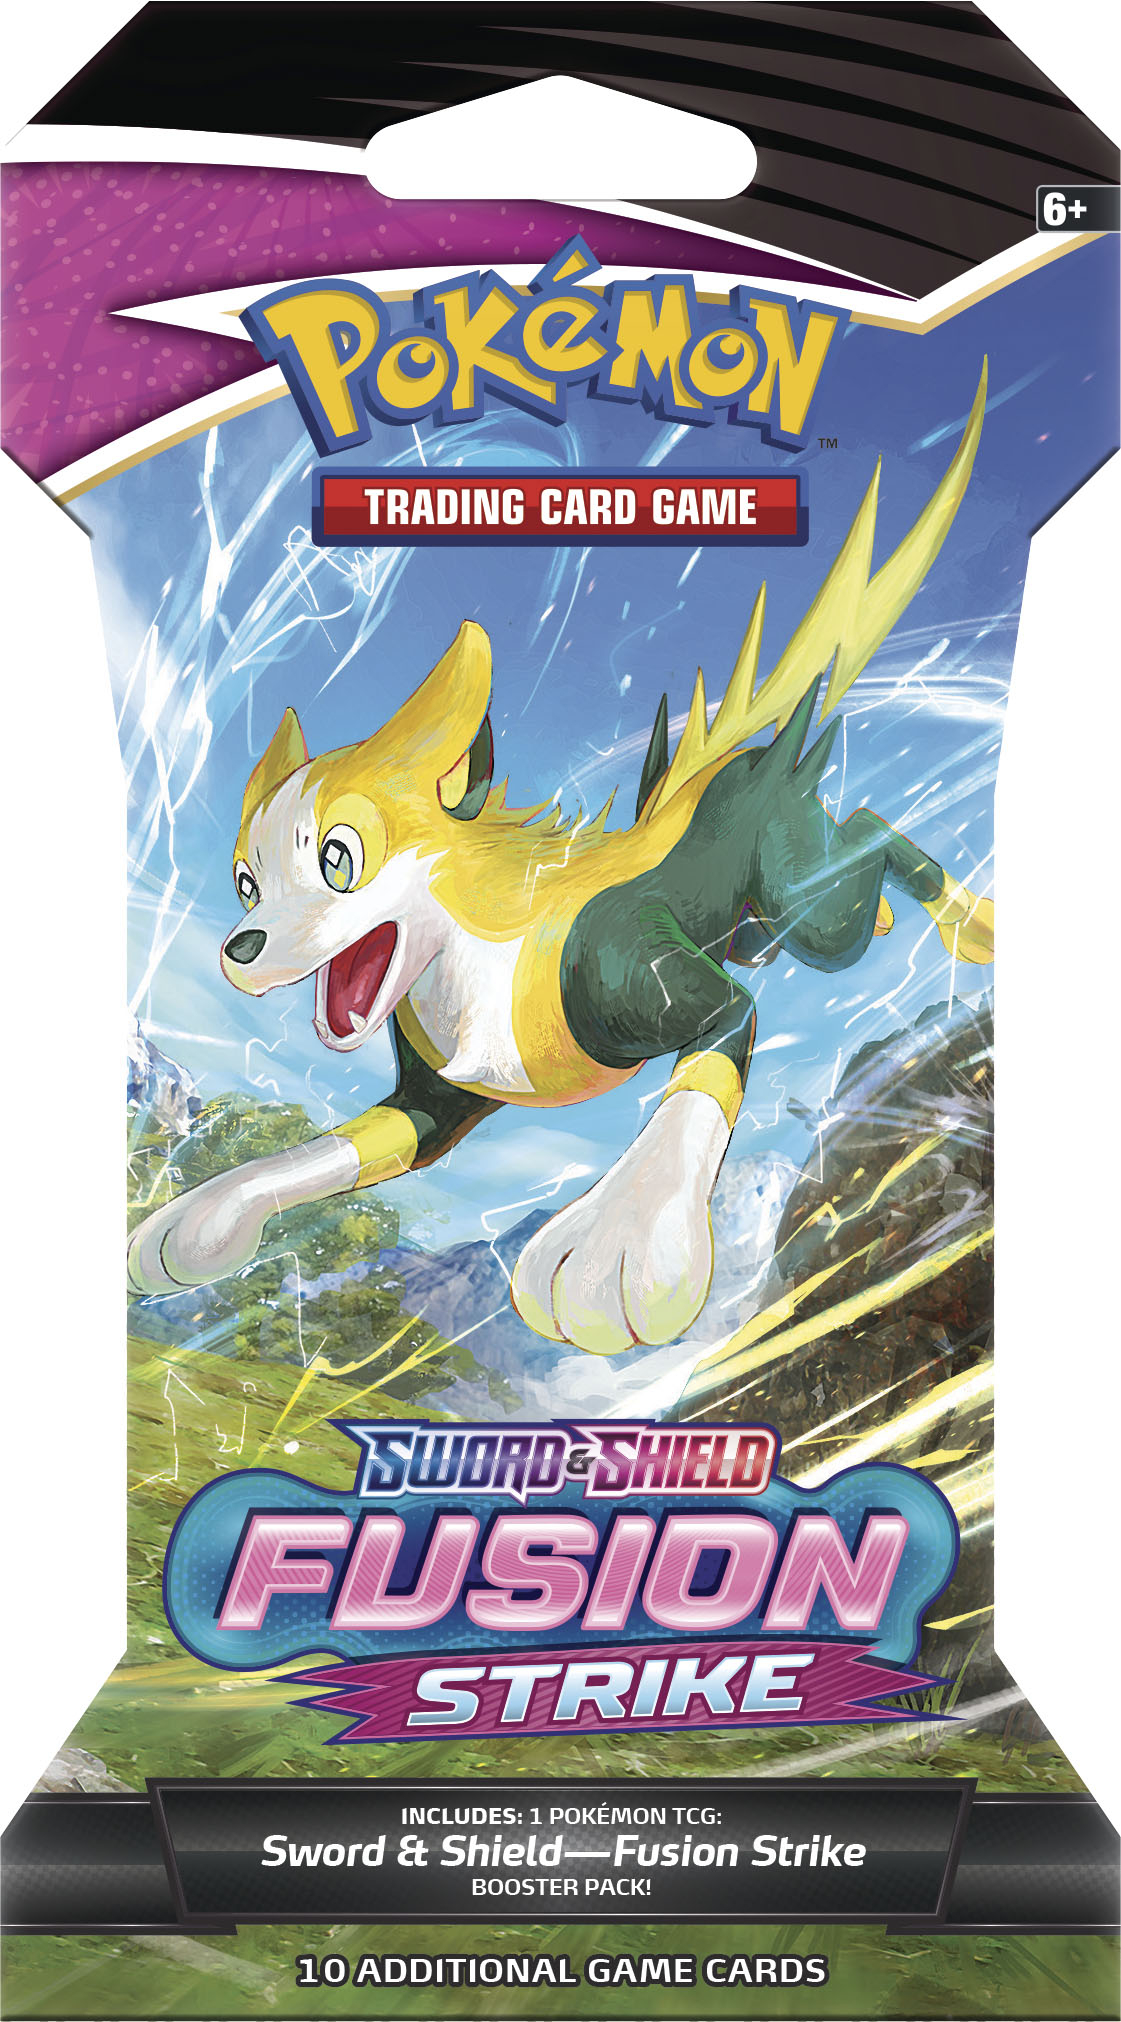 Pokémon Trading Card Game: Battle Styles Sleeved Boosters 82819 - Best Buy